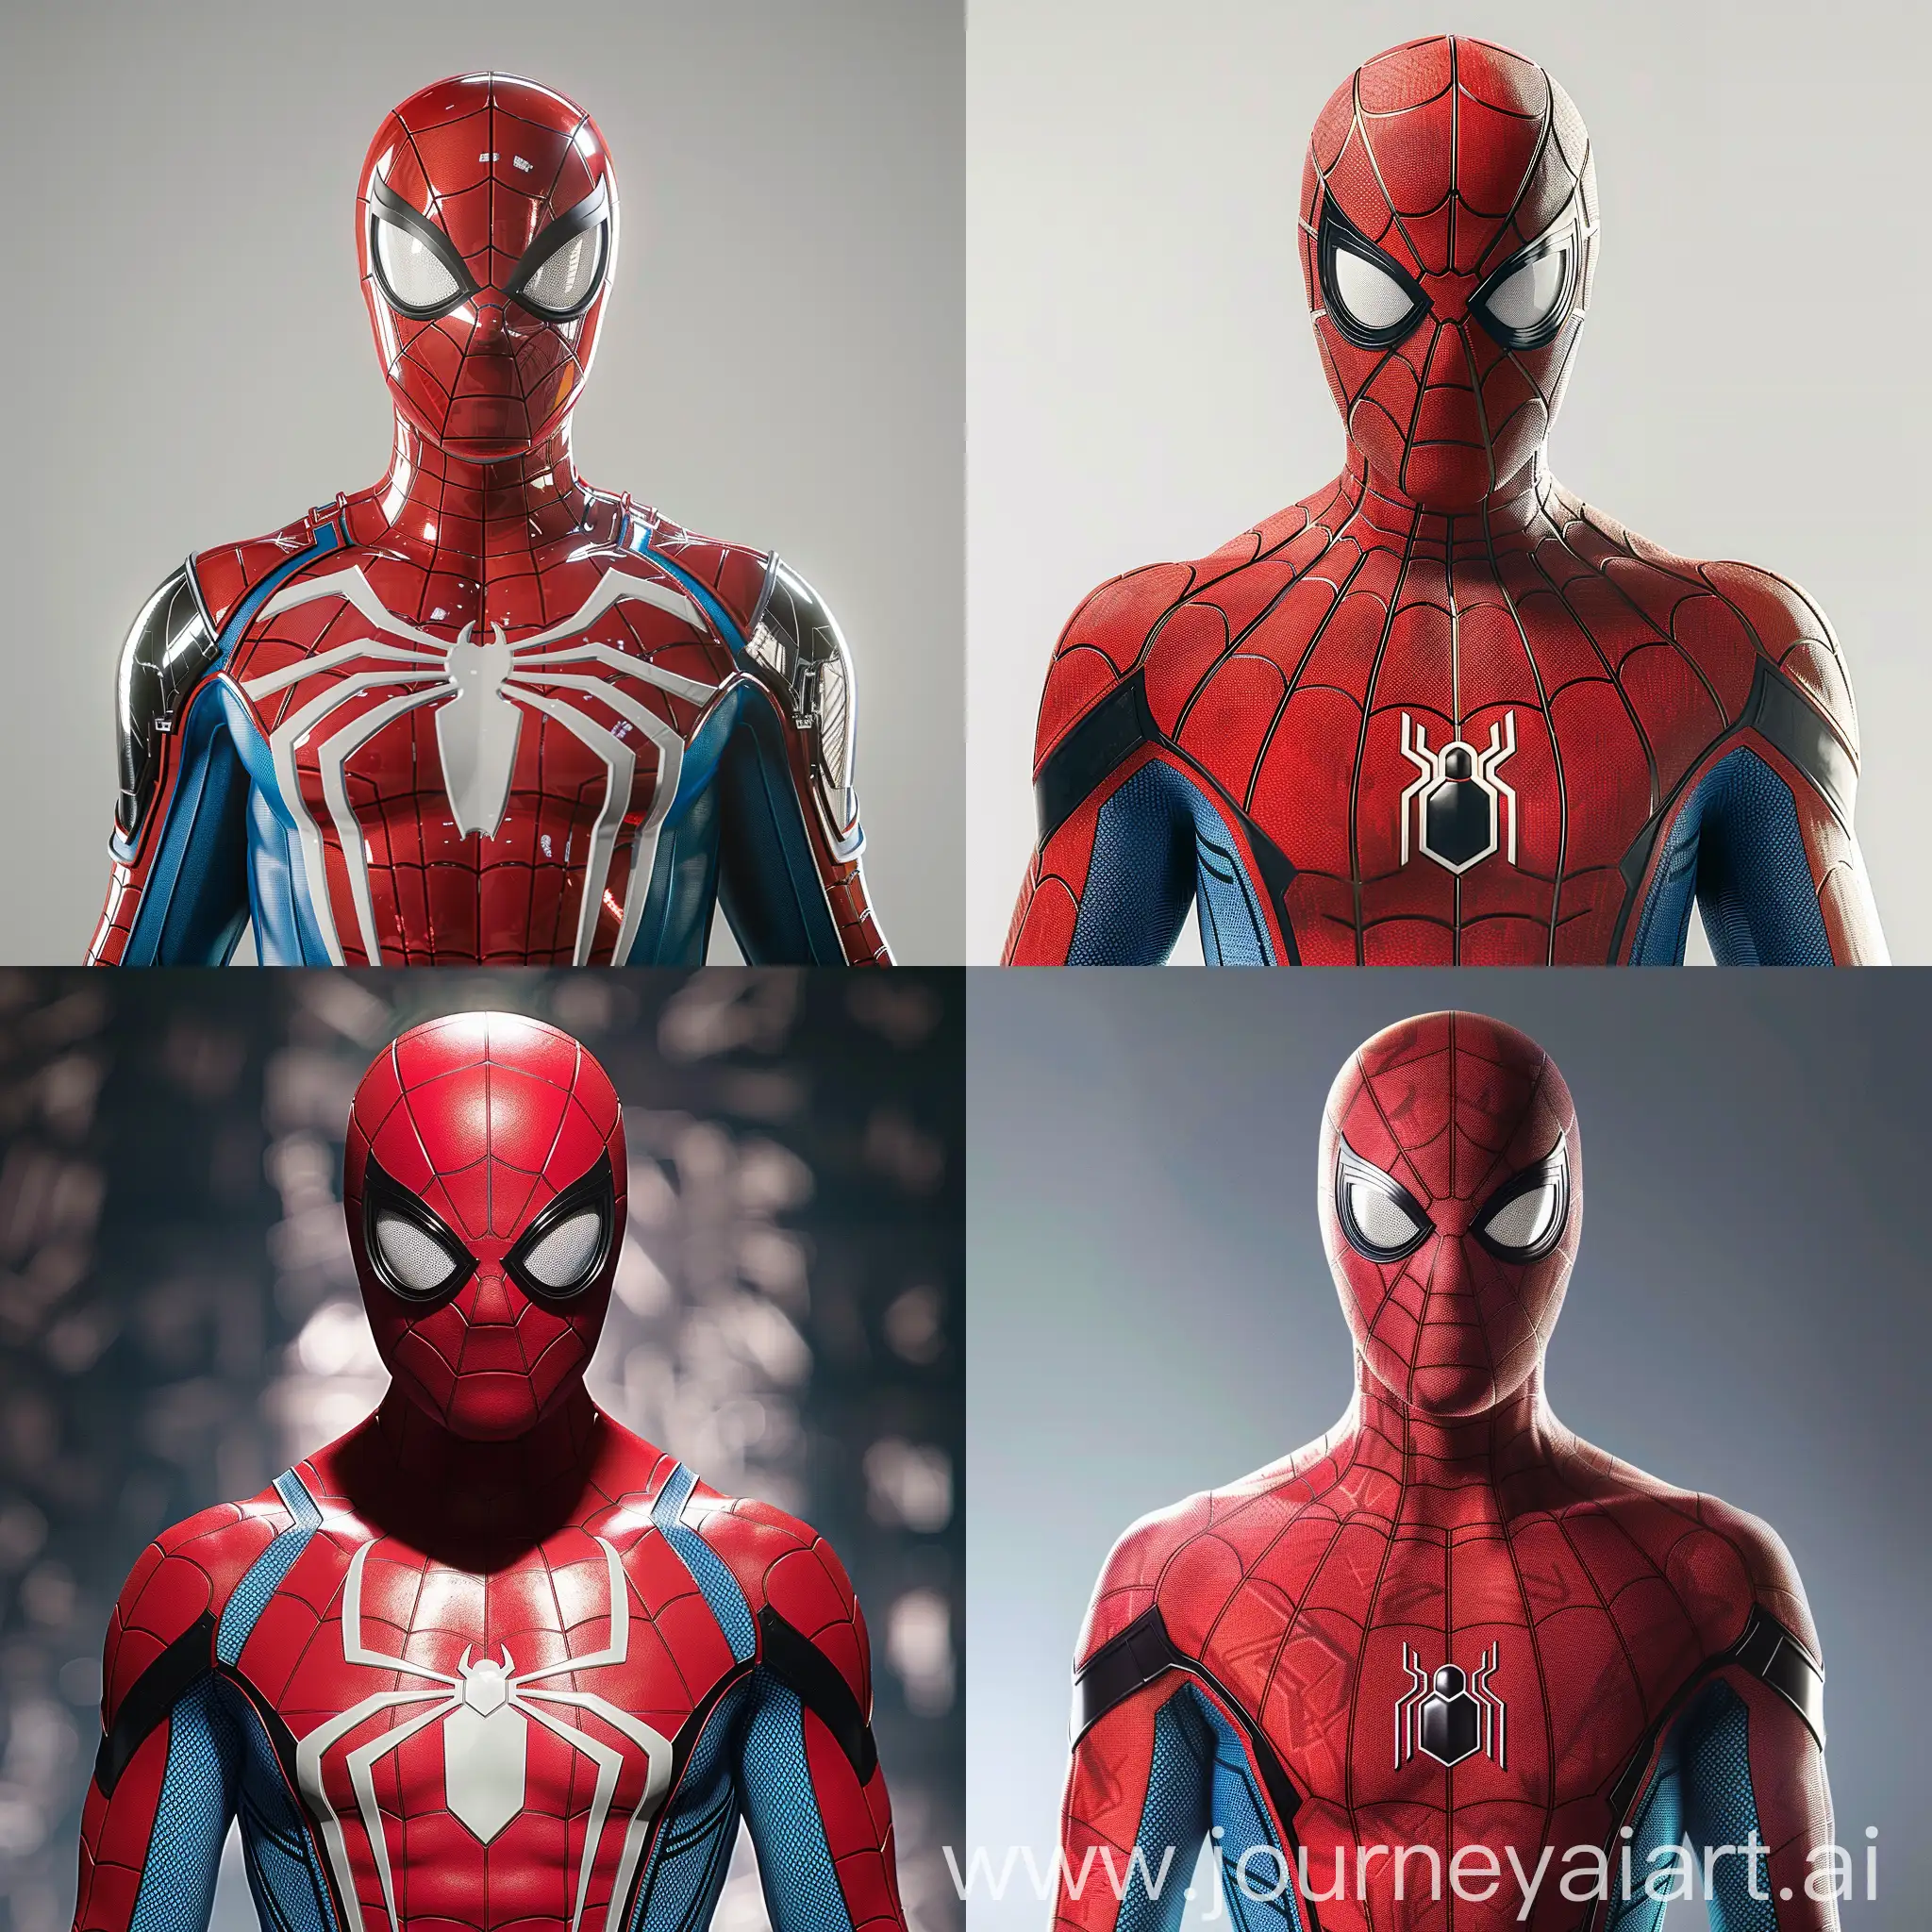 Dynamic-SpiderMan-Advanced-Suit-Poster-with-Stark-MCU-Features